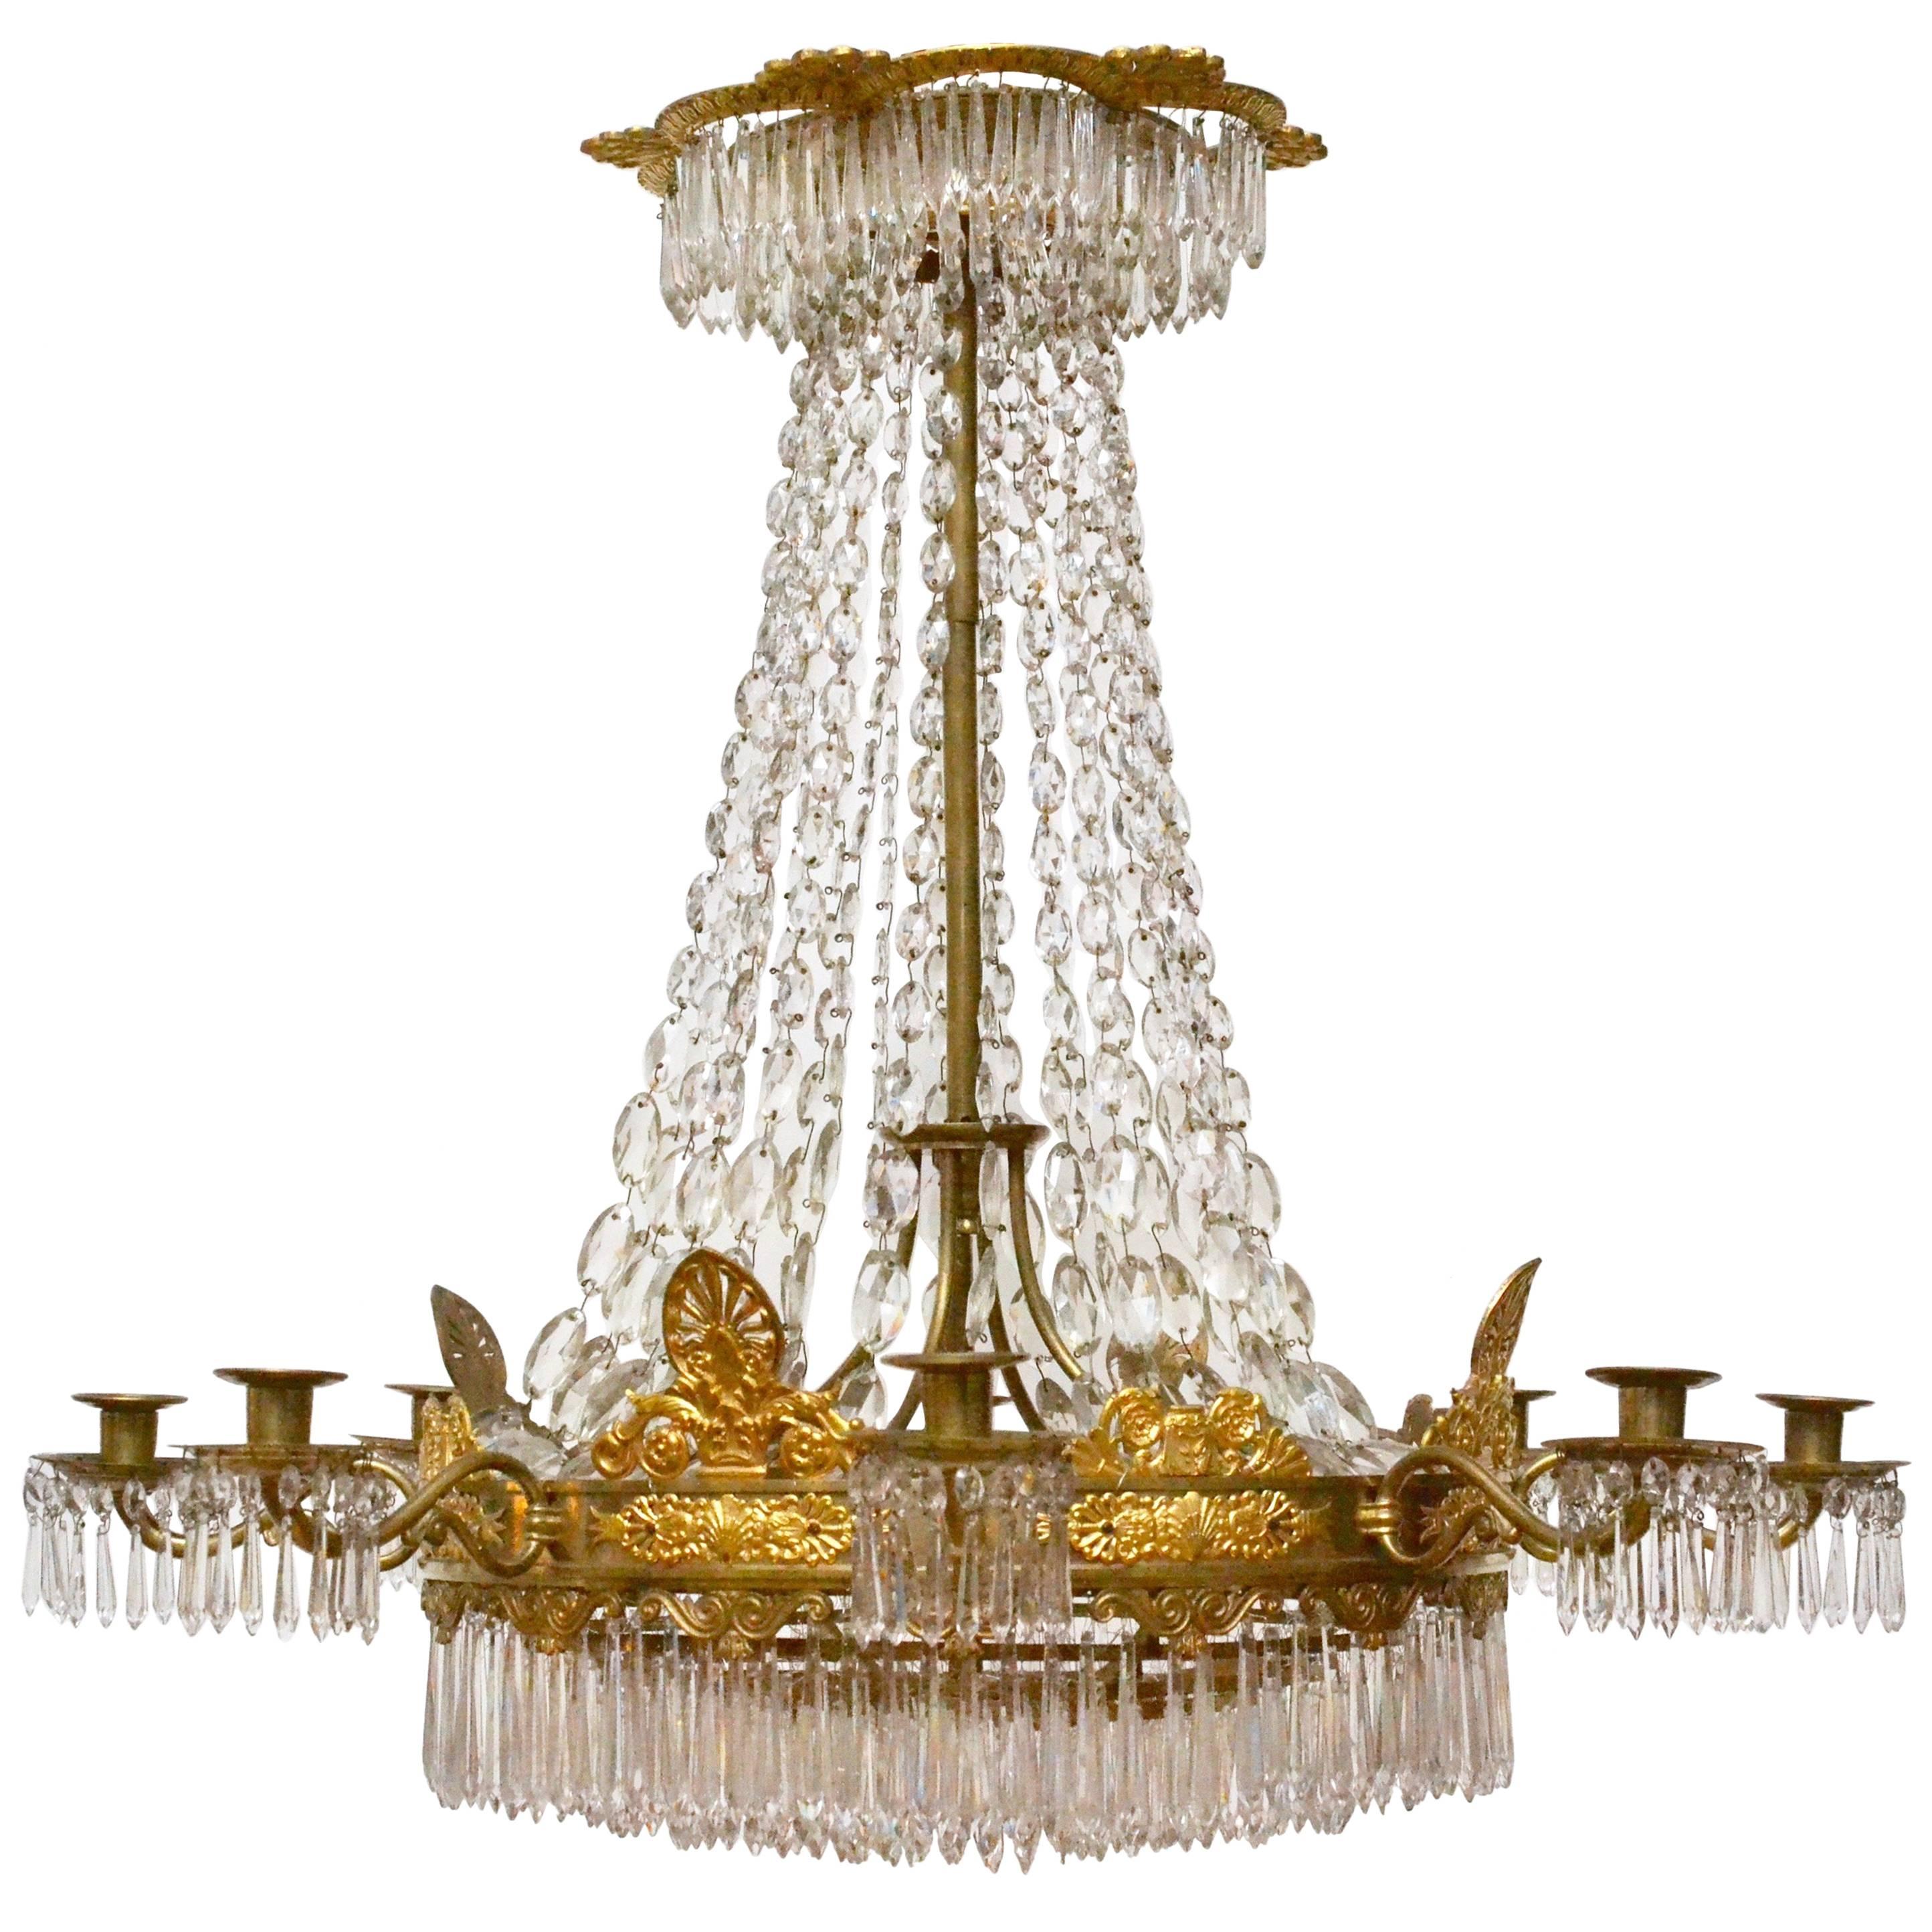 French Empire Gilt Bronze and Crystal Chandelier, Signed, circa 1825